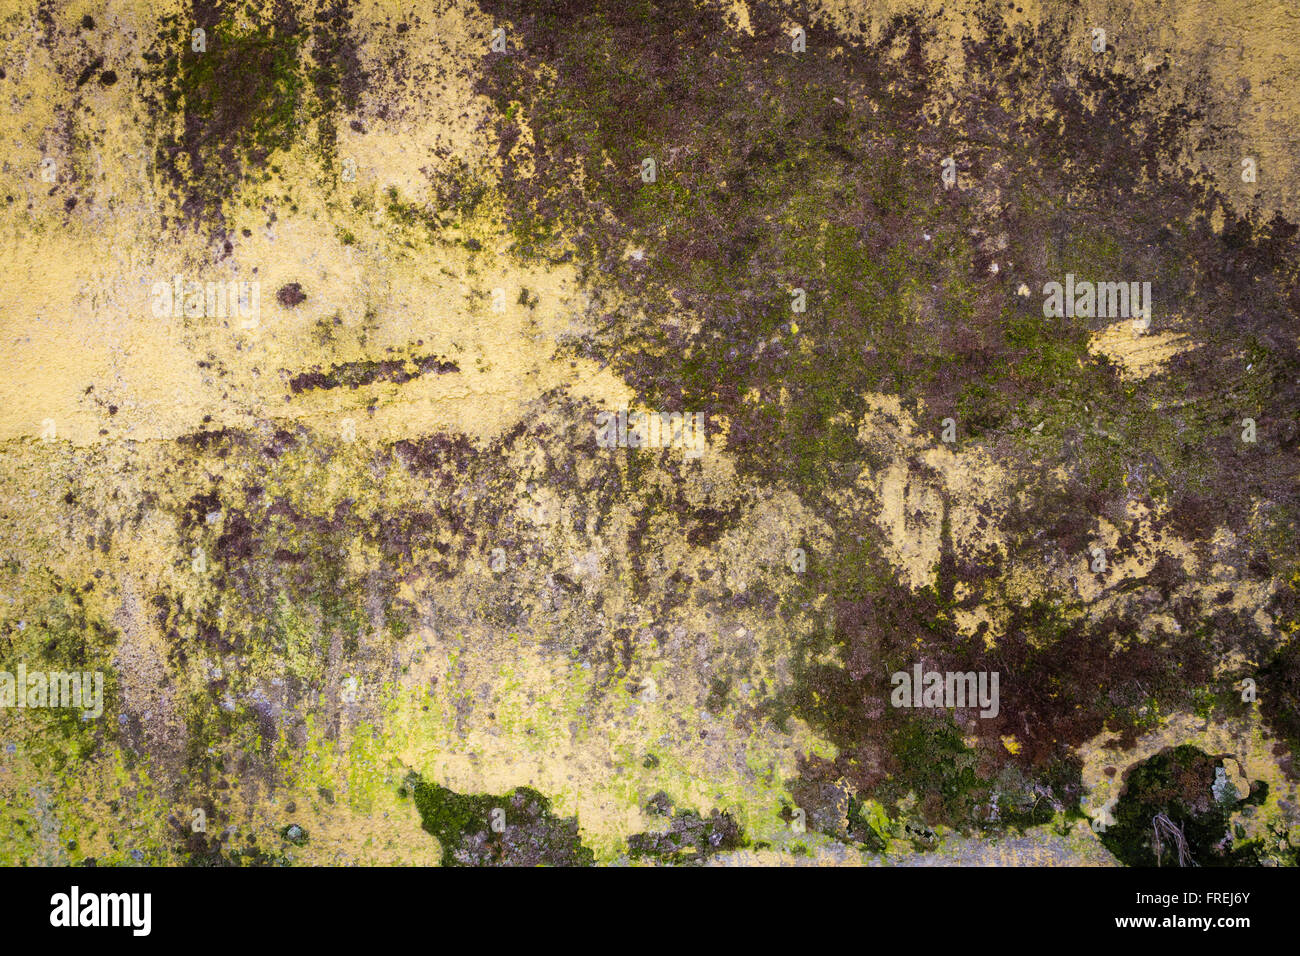 Moss, a small island on the wall. The walls are damp and old age. Stock Photo